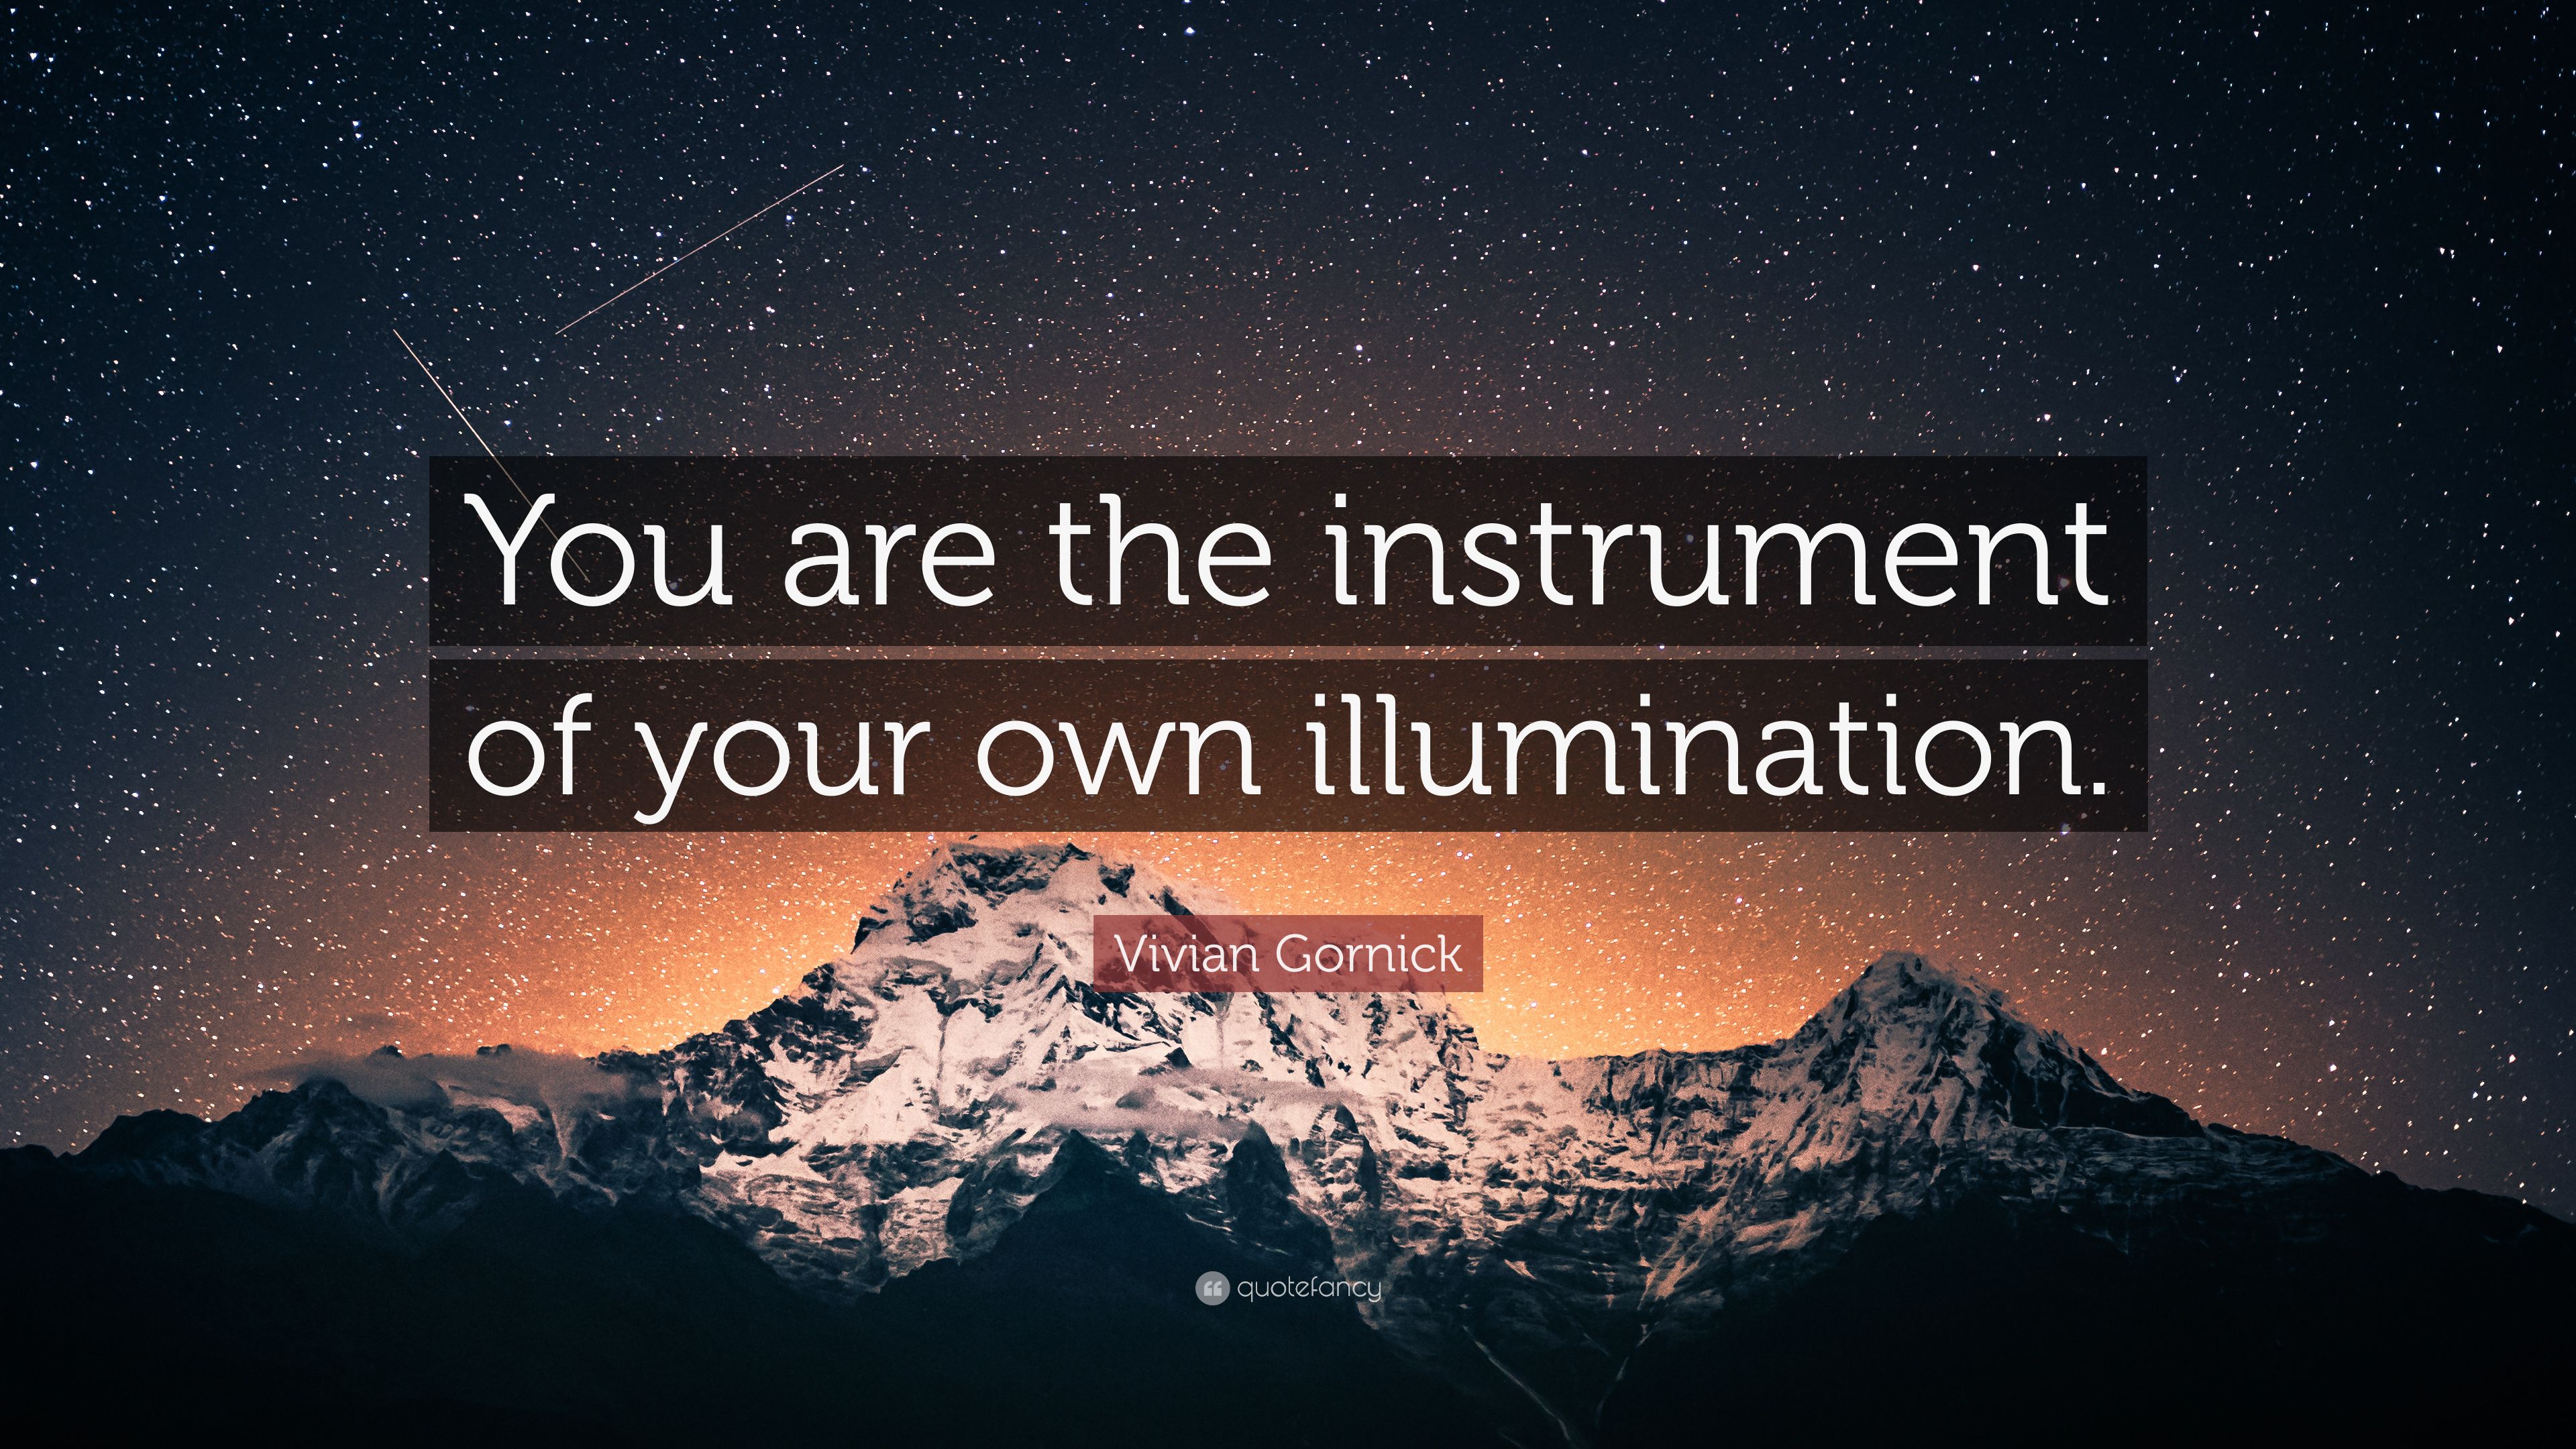 Vivian Gornick Quote: “You are the instrument of your own